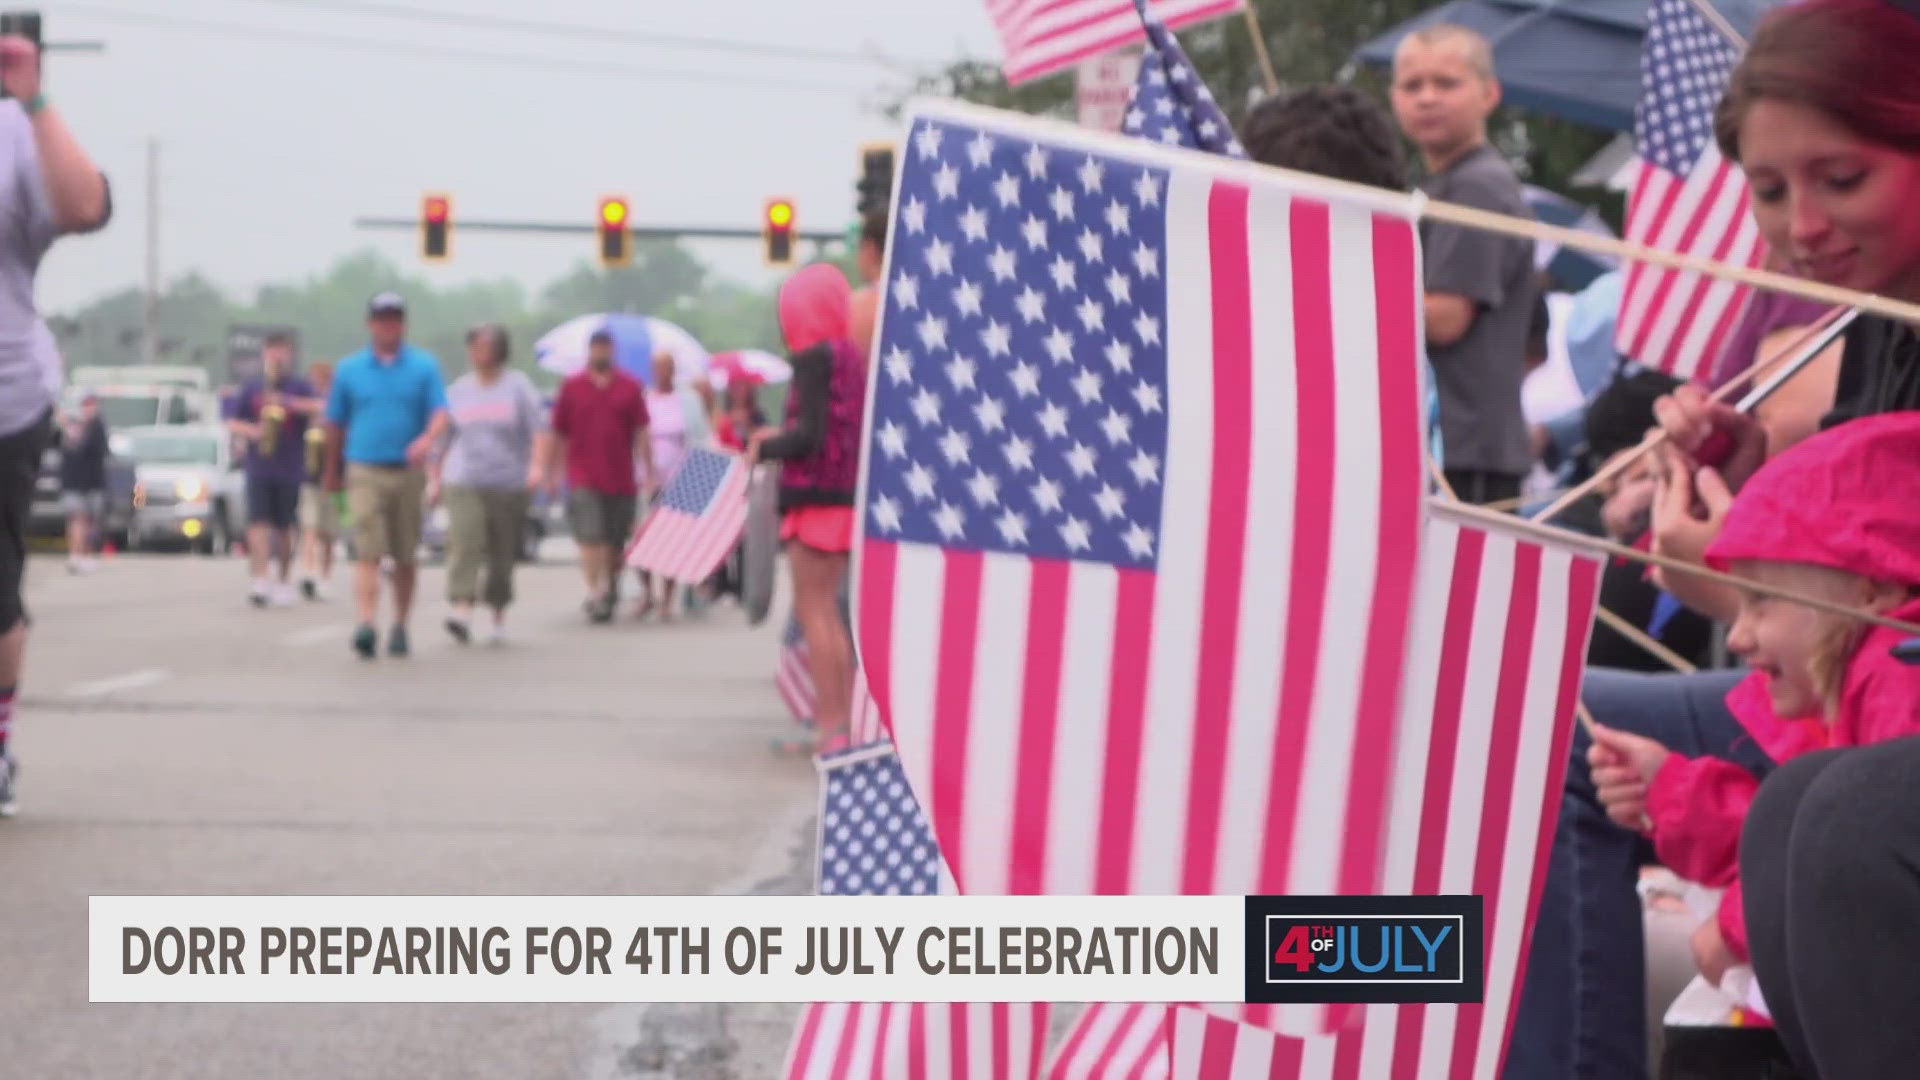 The four-day event promises patriotic pomp and circumstance for the small community and surrounding areas.